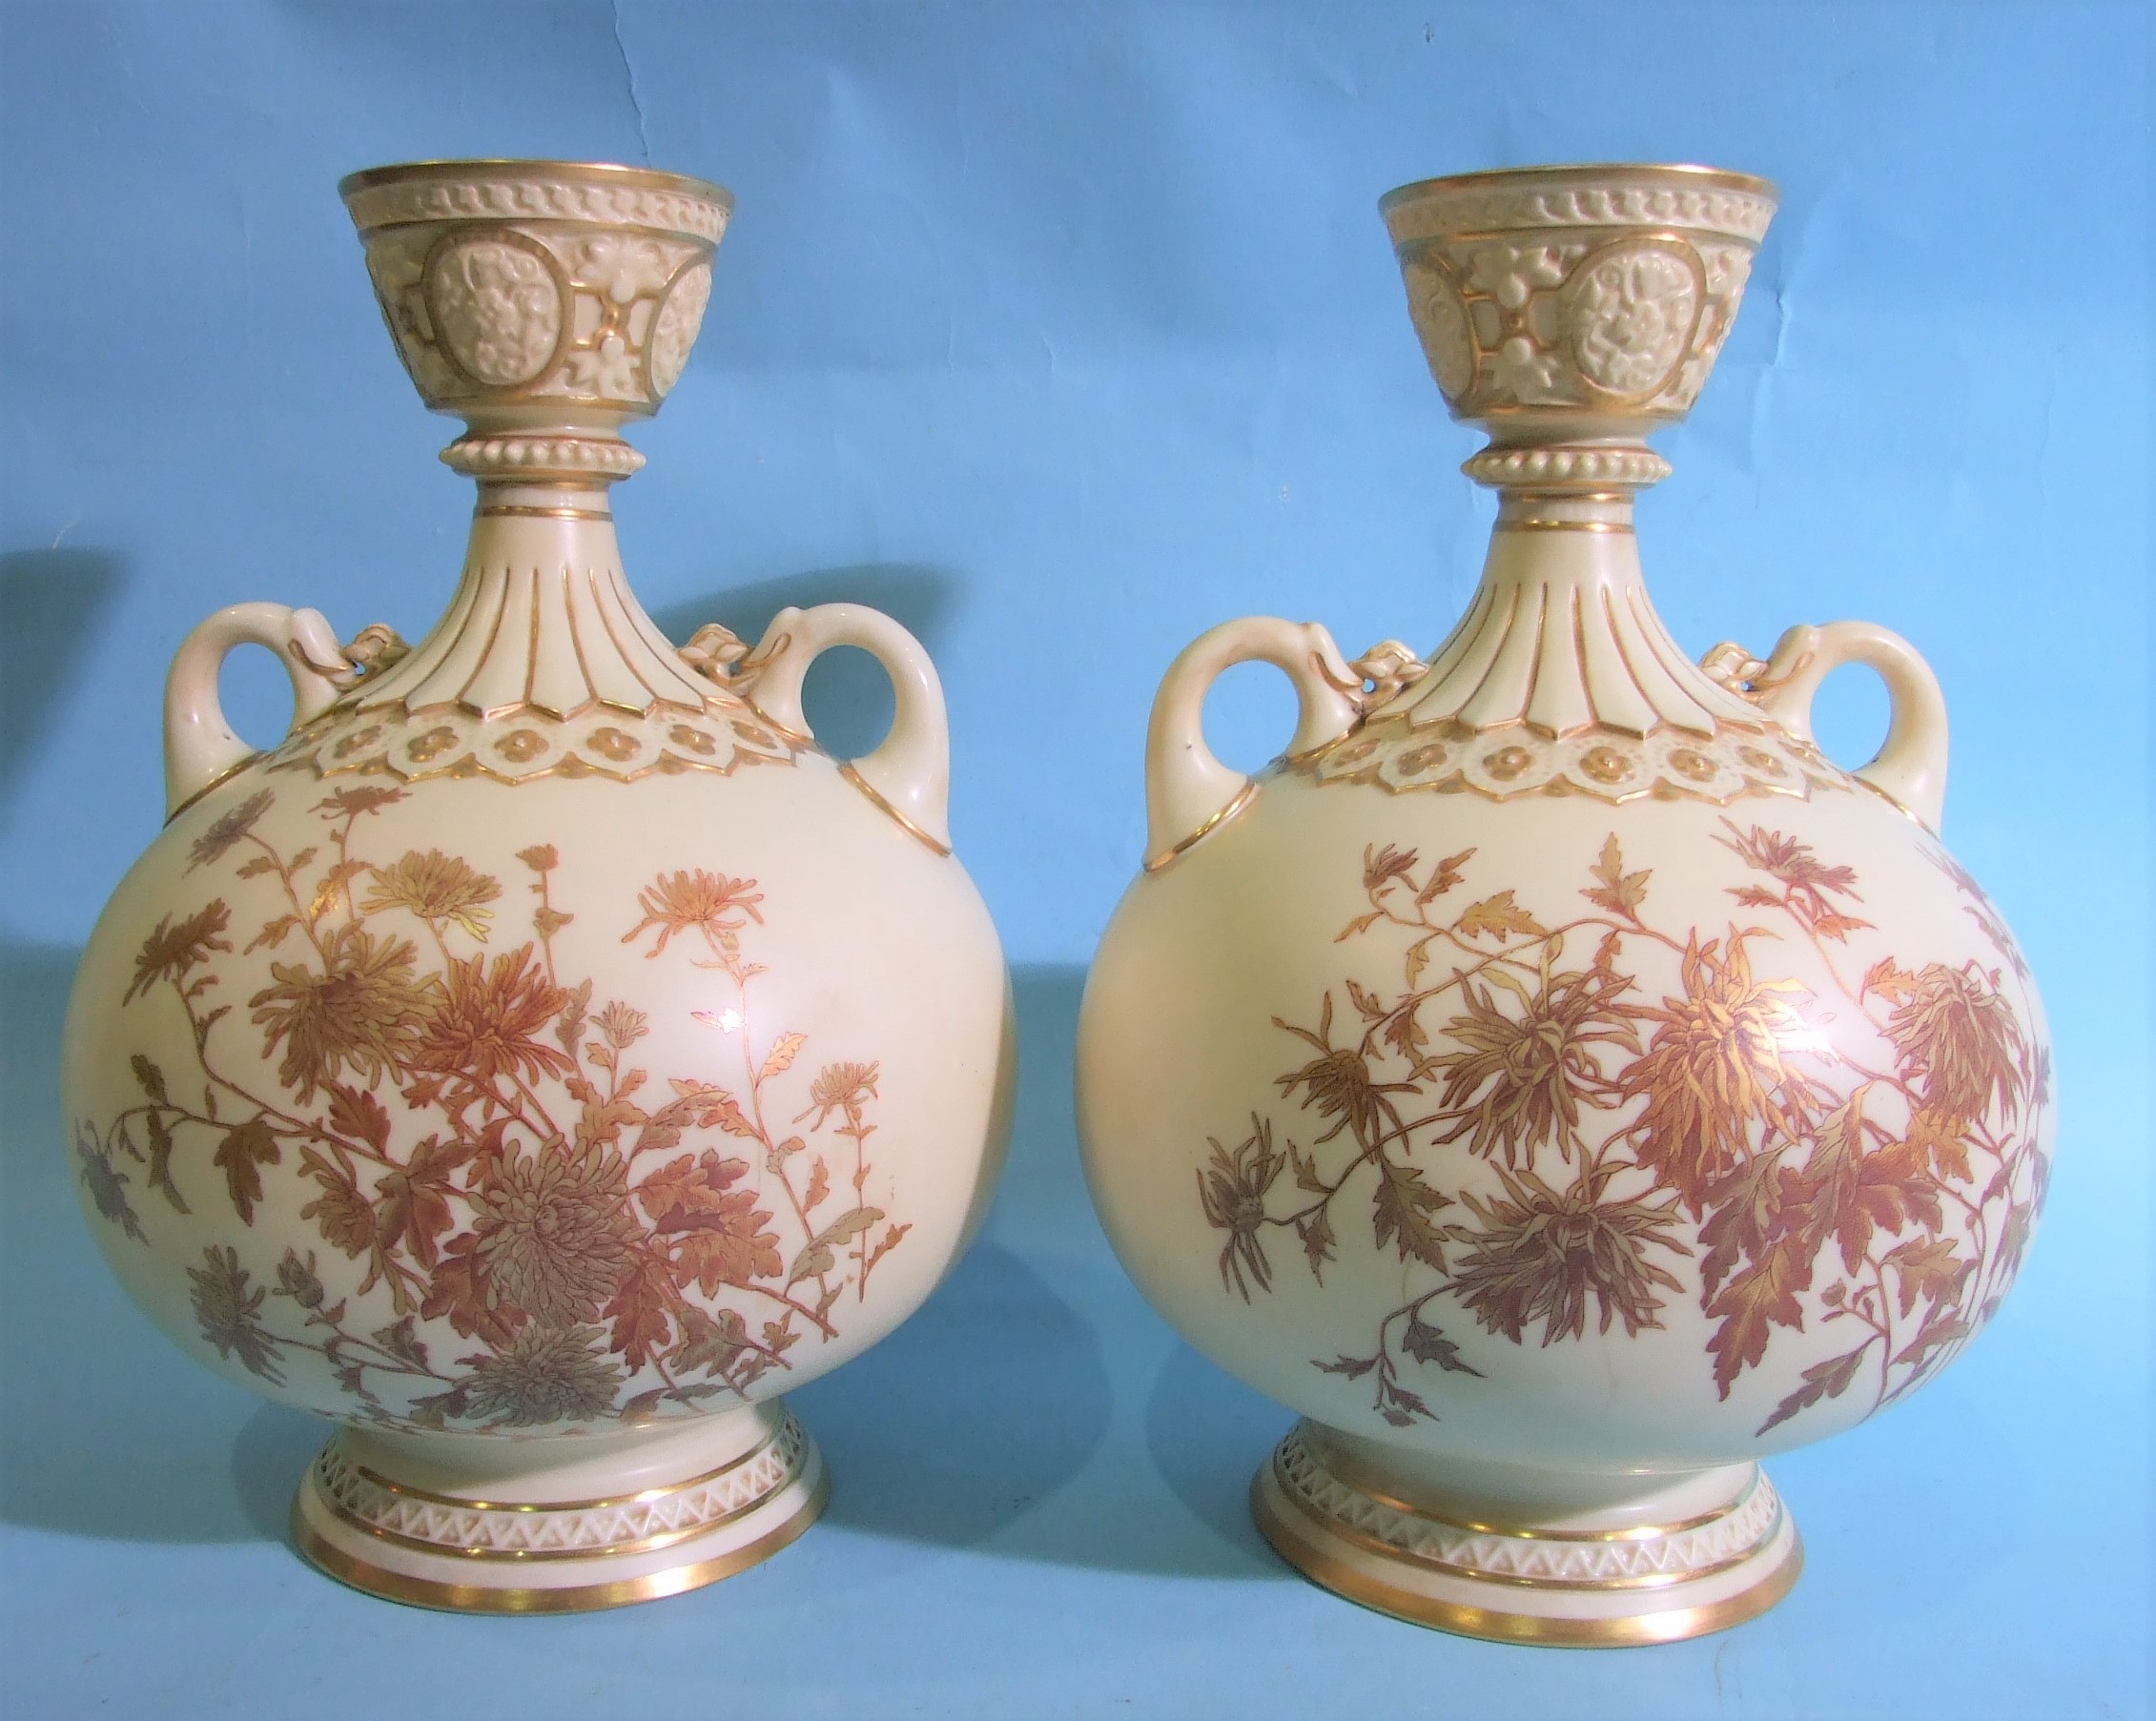 A pair of Royal Worcester baluster-shaped two-handled vases, having a cup neck with gilt floral